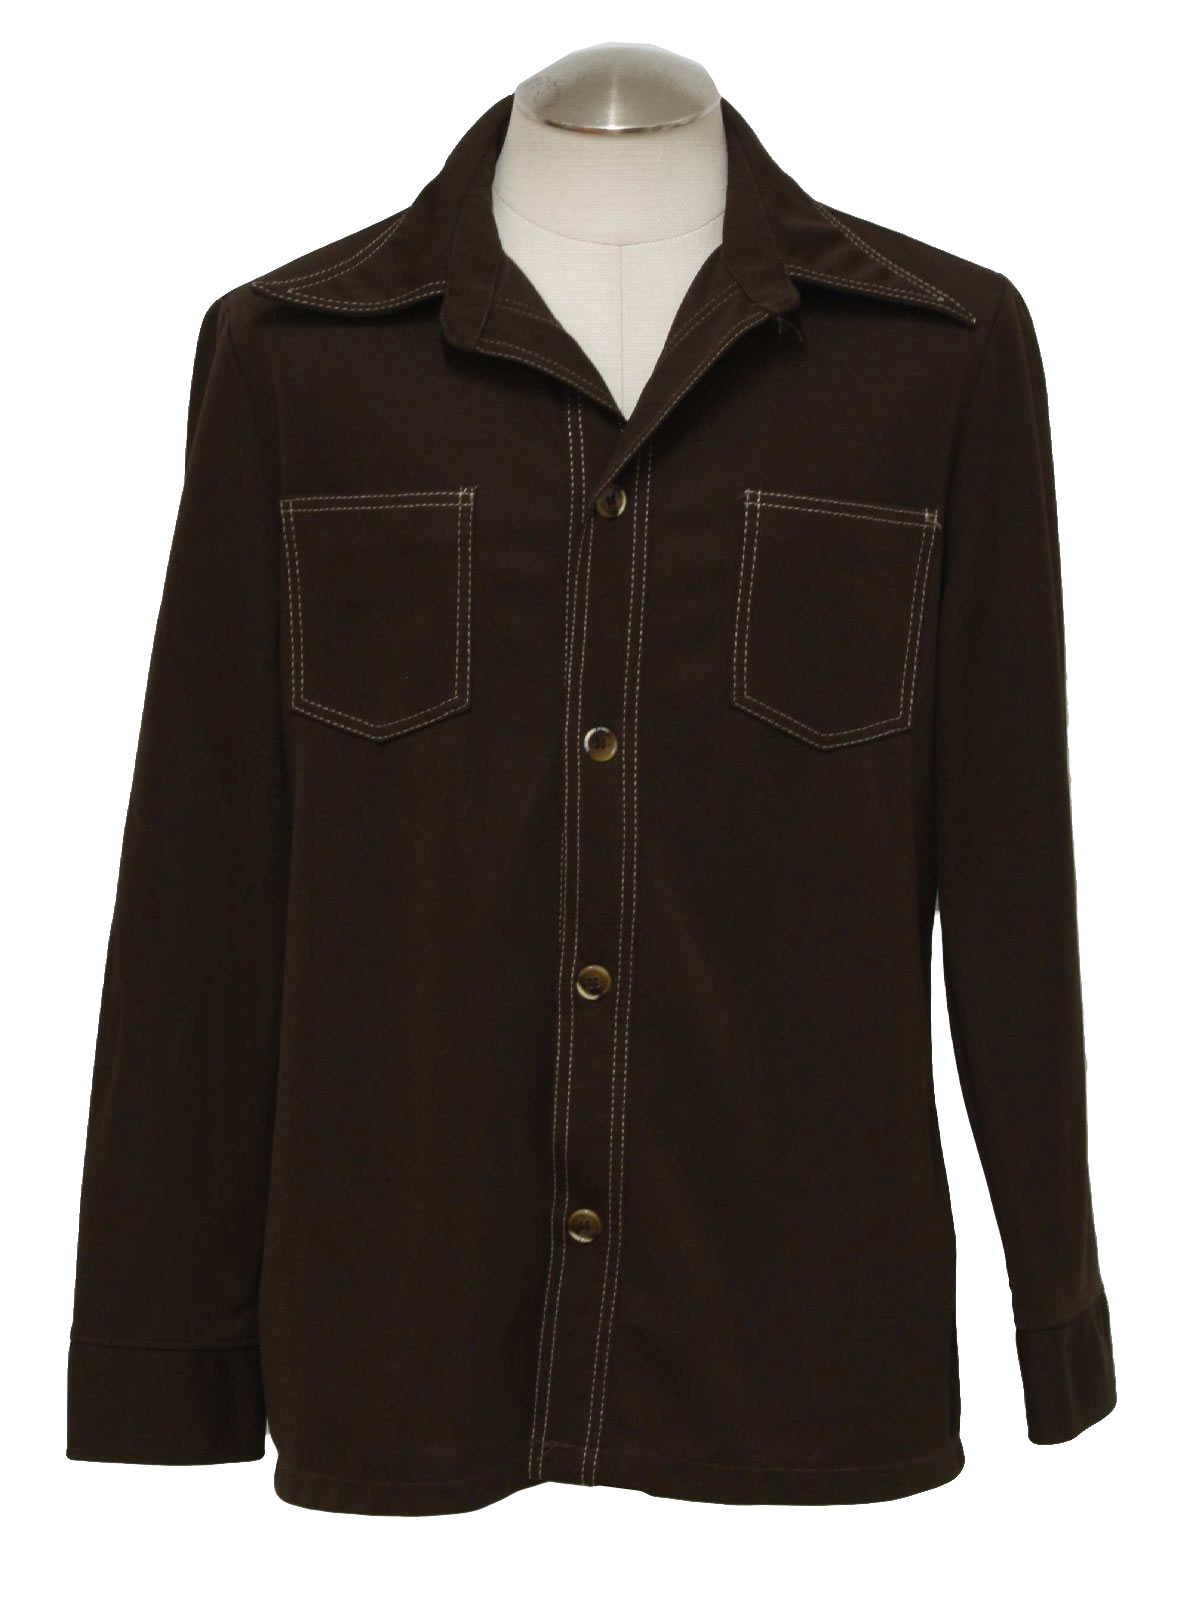 Retro 1970's Jacket (JCPenney) : 70s -JCPenney- Mens dark brown double ...